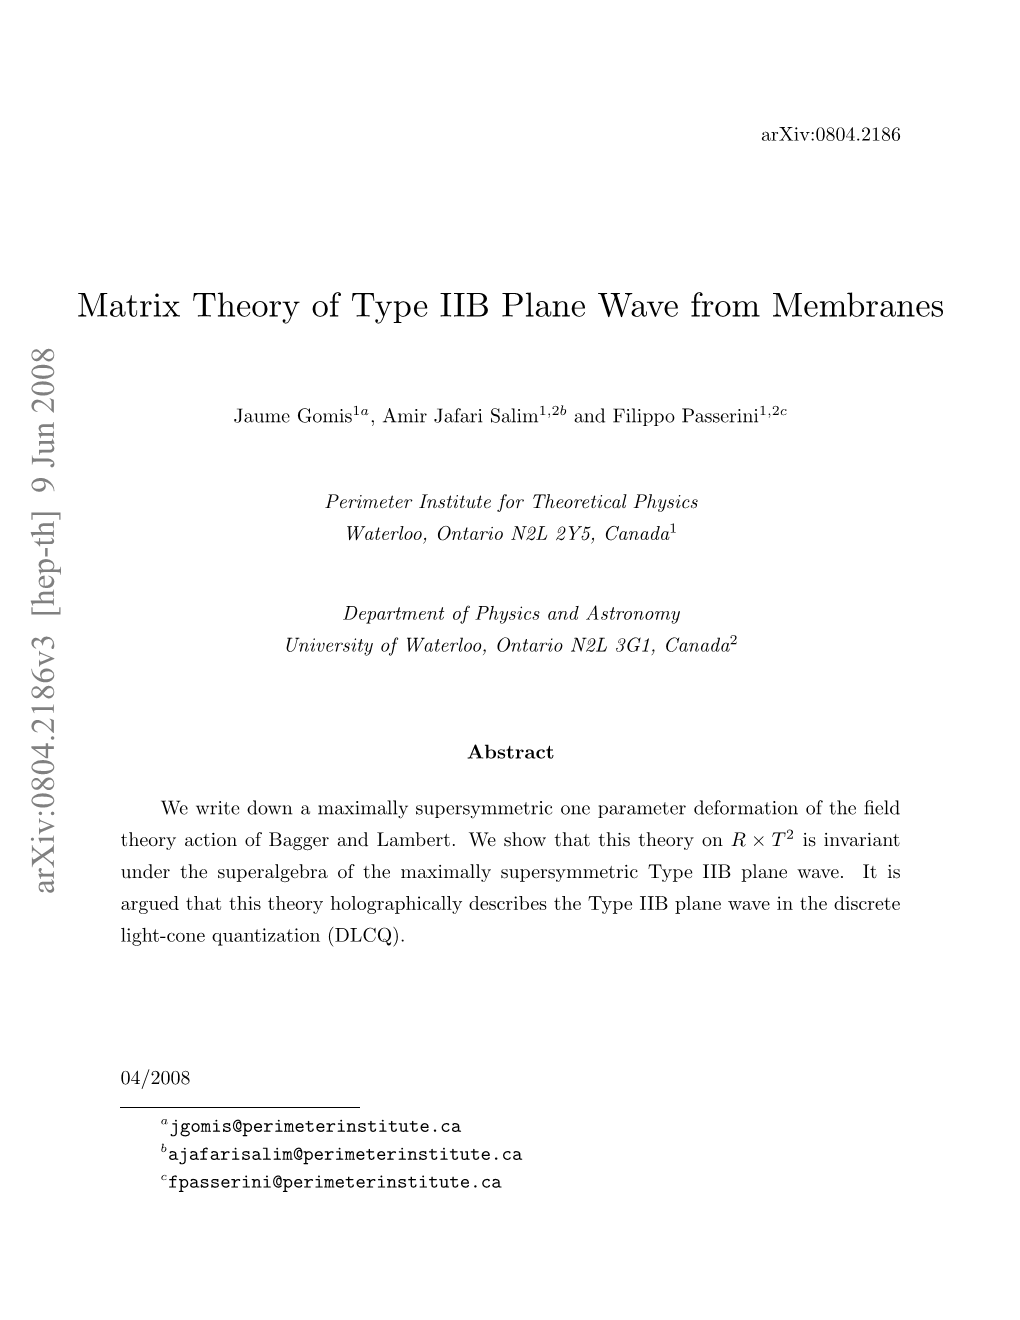 Matrix Theory of Type IIB Plane Wave from Membranes